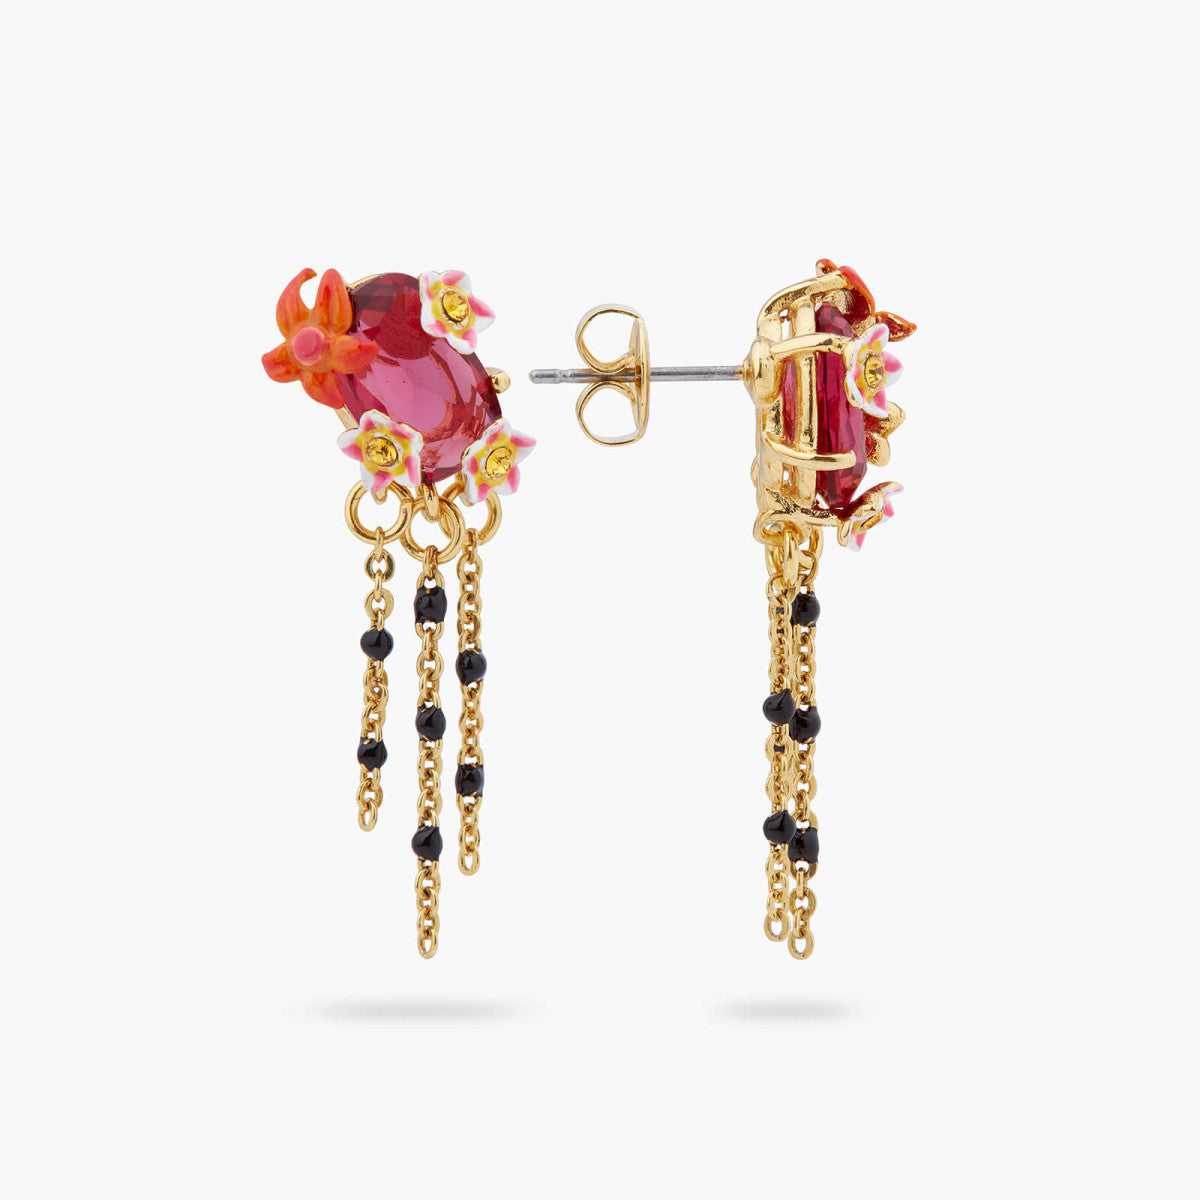 FACETED CRYSTAL AND EXOTIC FLOWER DANGLING POST EARRINGS